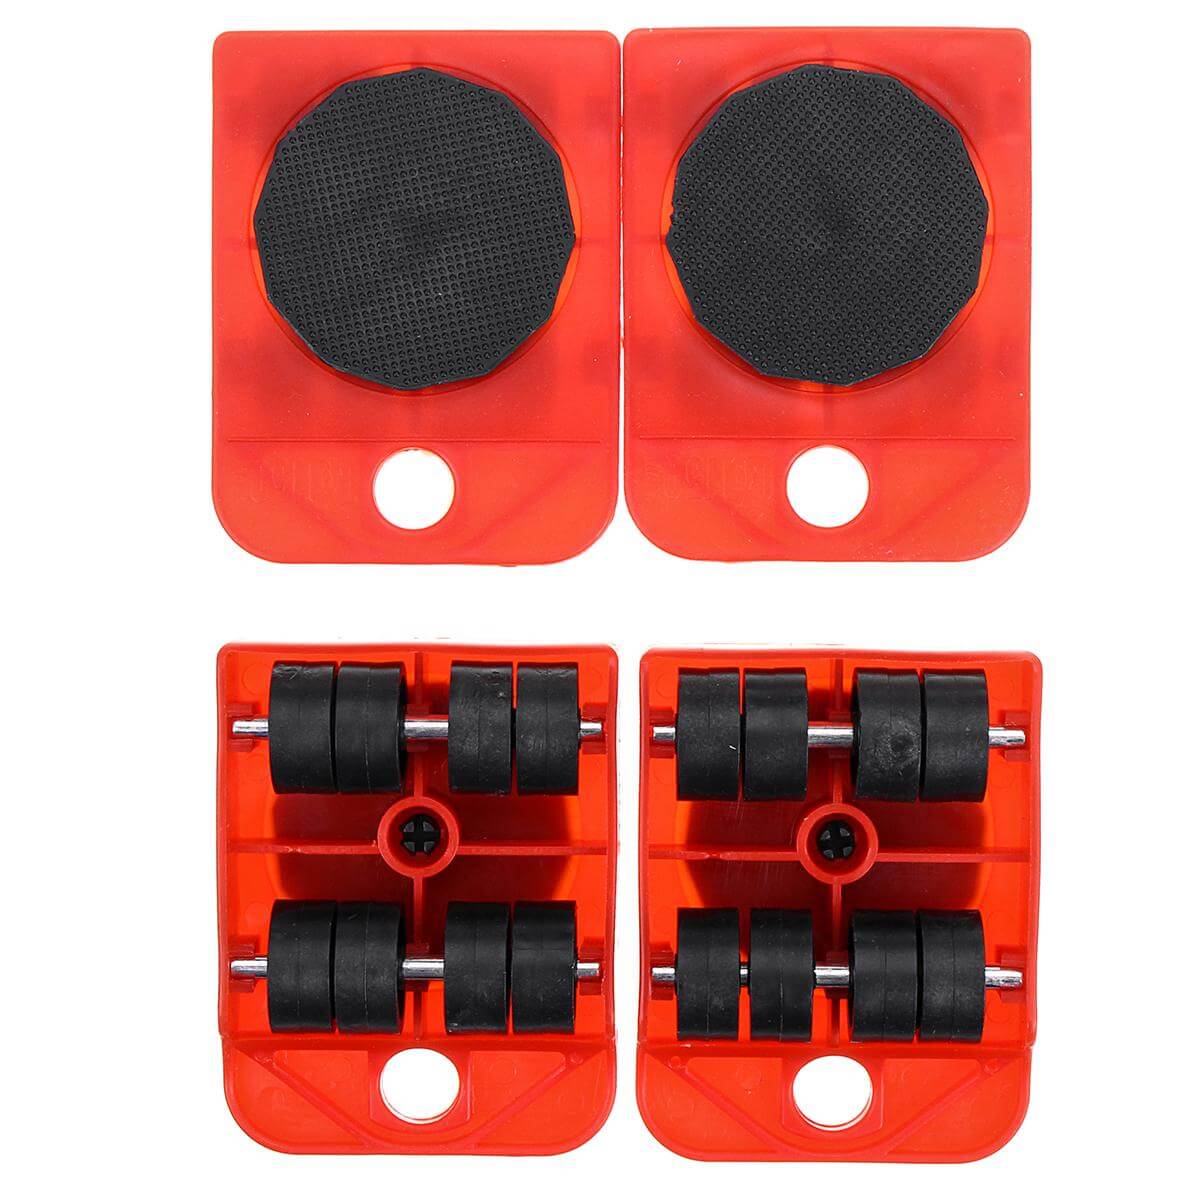 5PCS Furniture Mover Tool Set Transport Lifter Heavy Stuffs Moving 4 Wheeled Roller With 1 Wheel Bar Hand For Home Tool